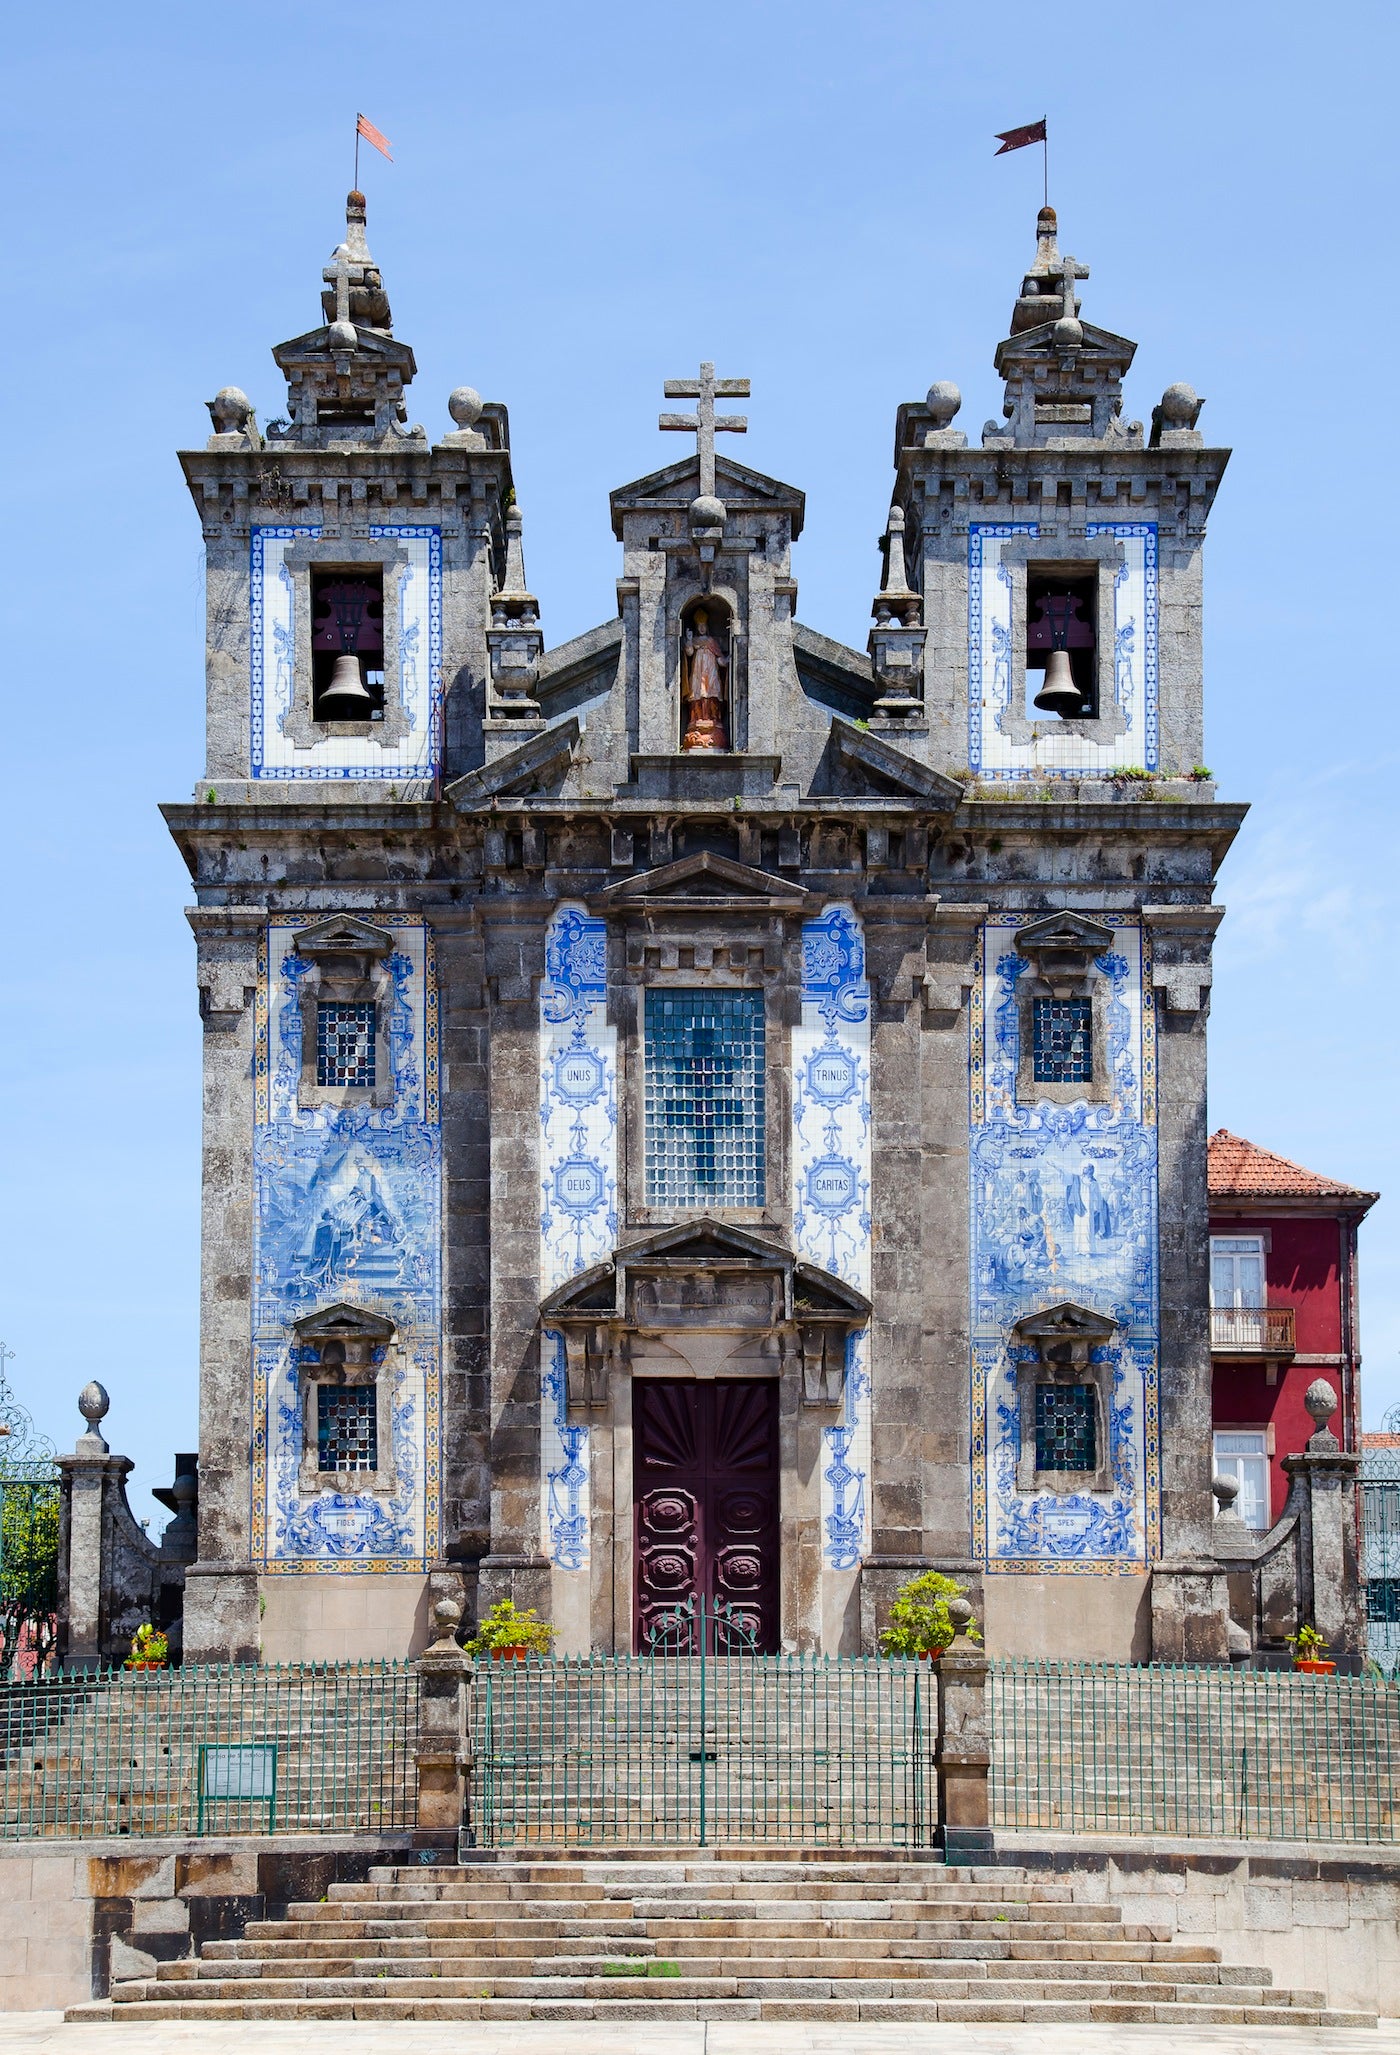 Some of the weirdest and most beautiful church decorations of all time